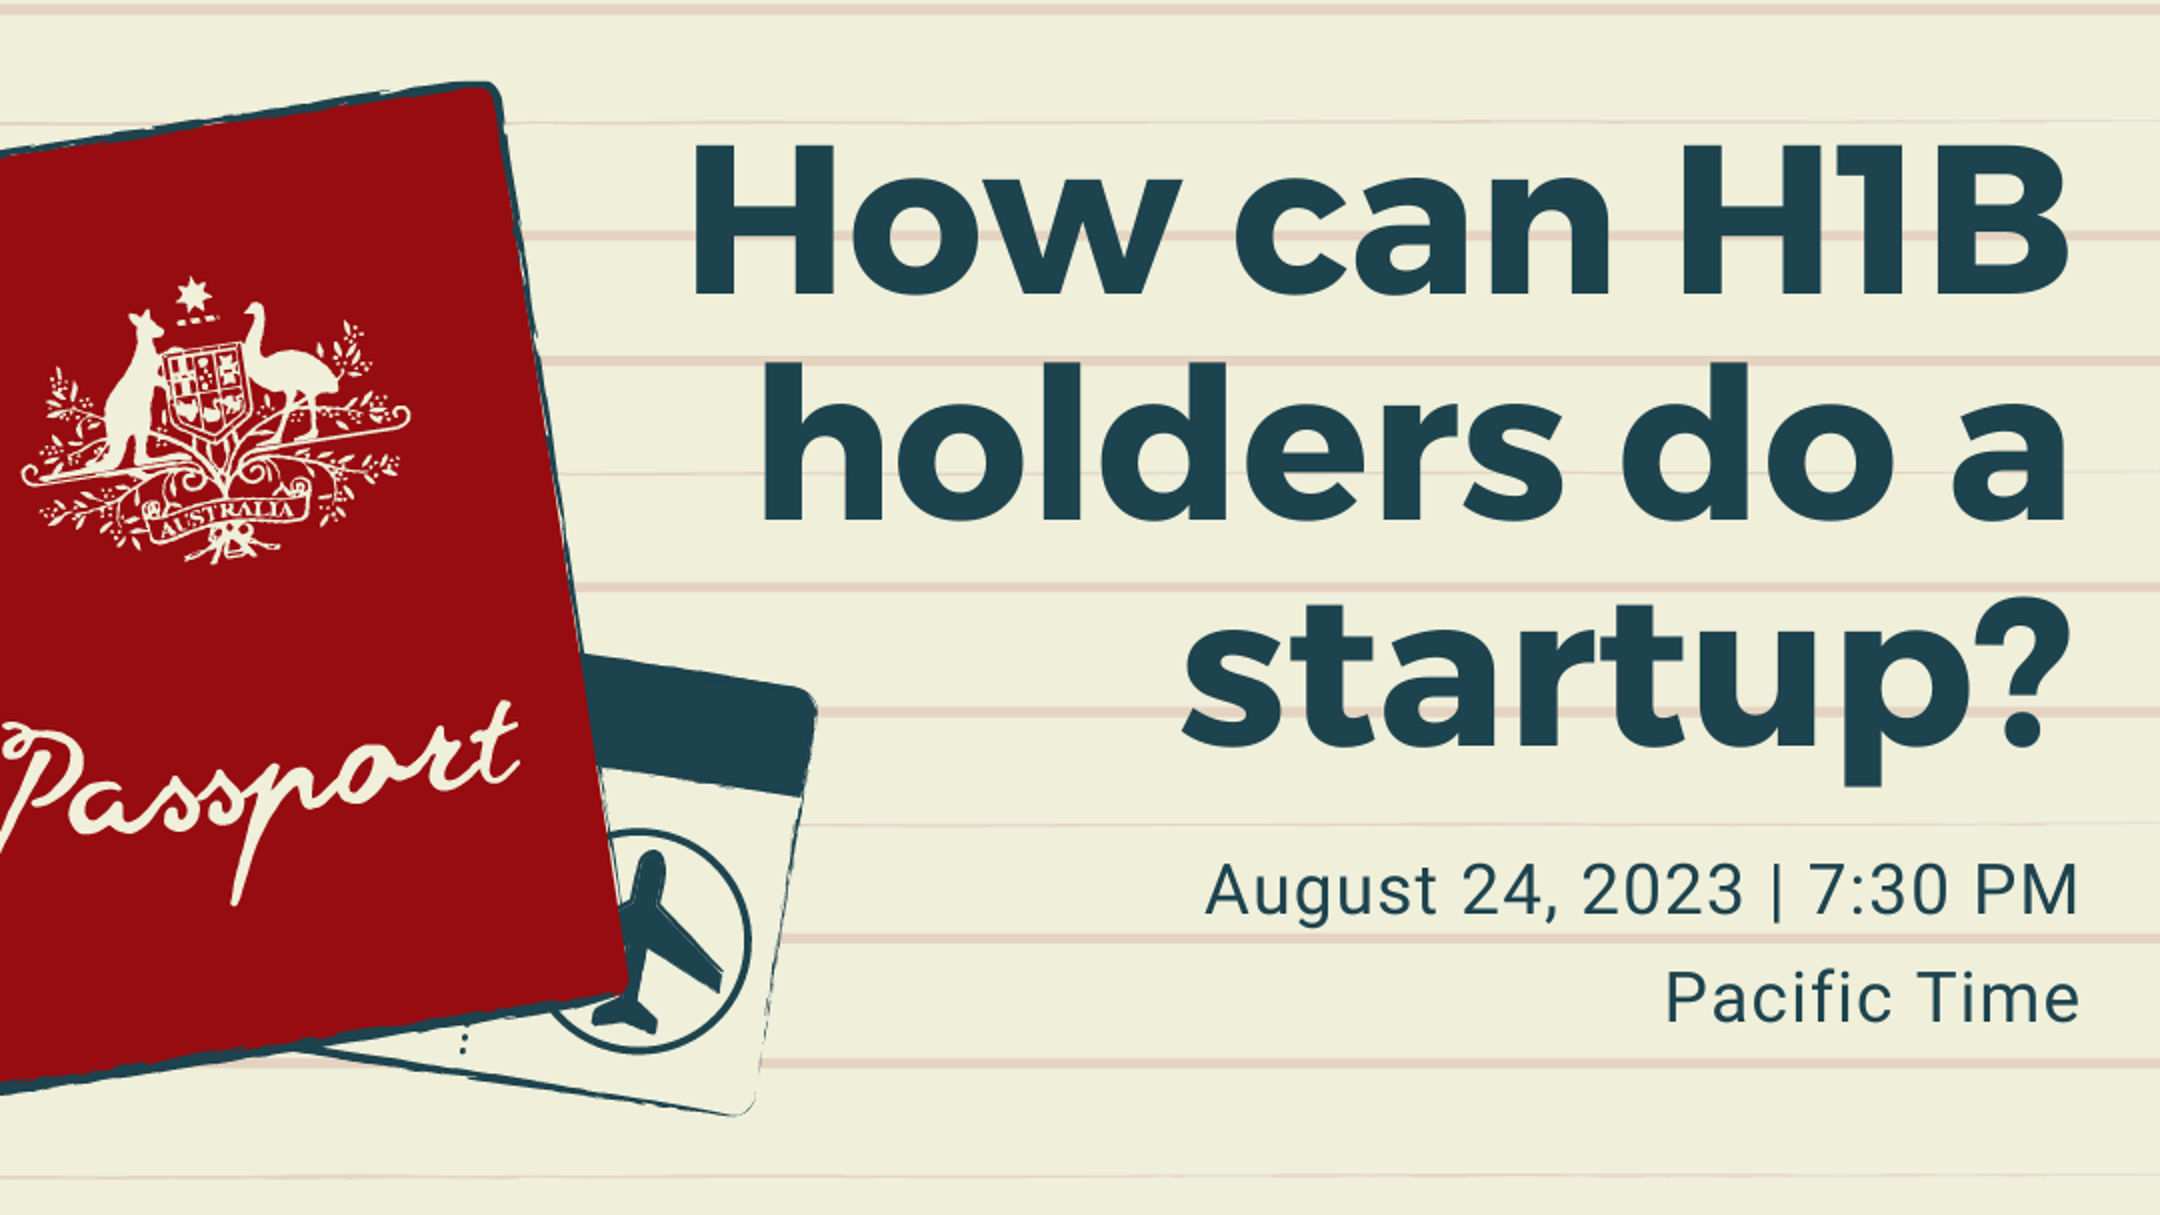 How can H1B holders do a startup? event